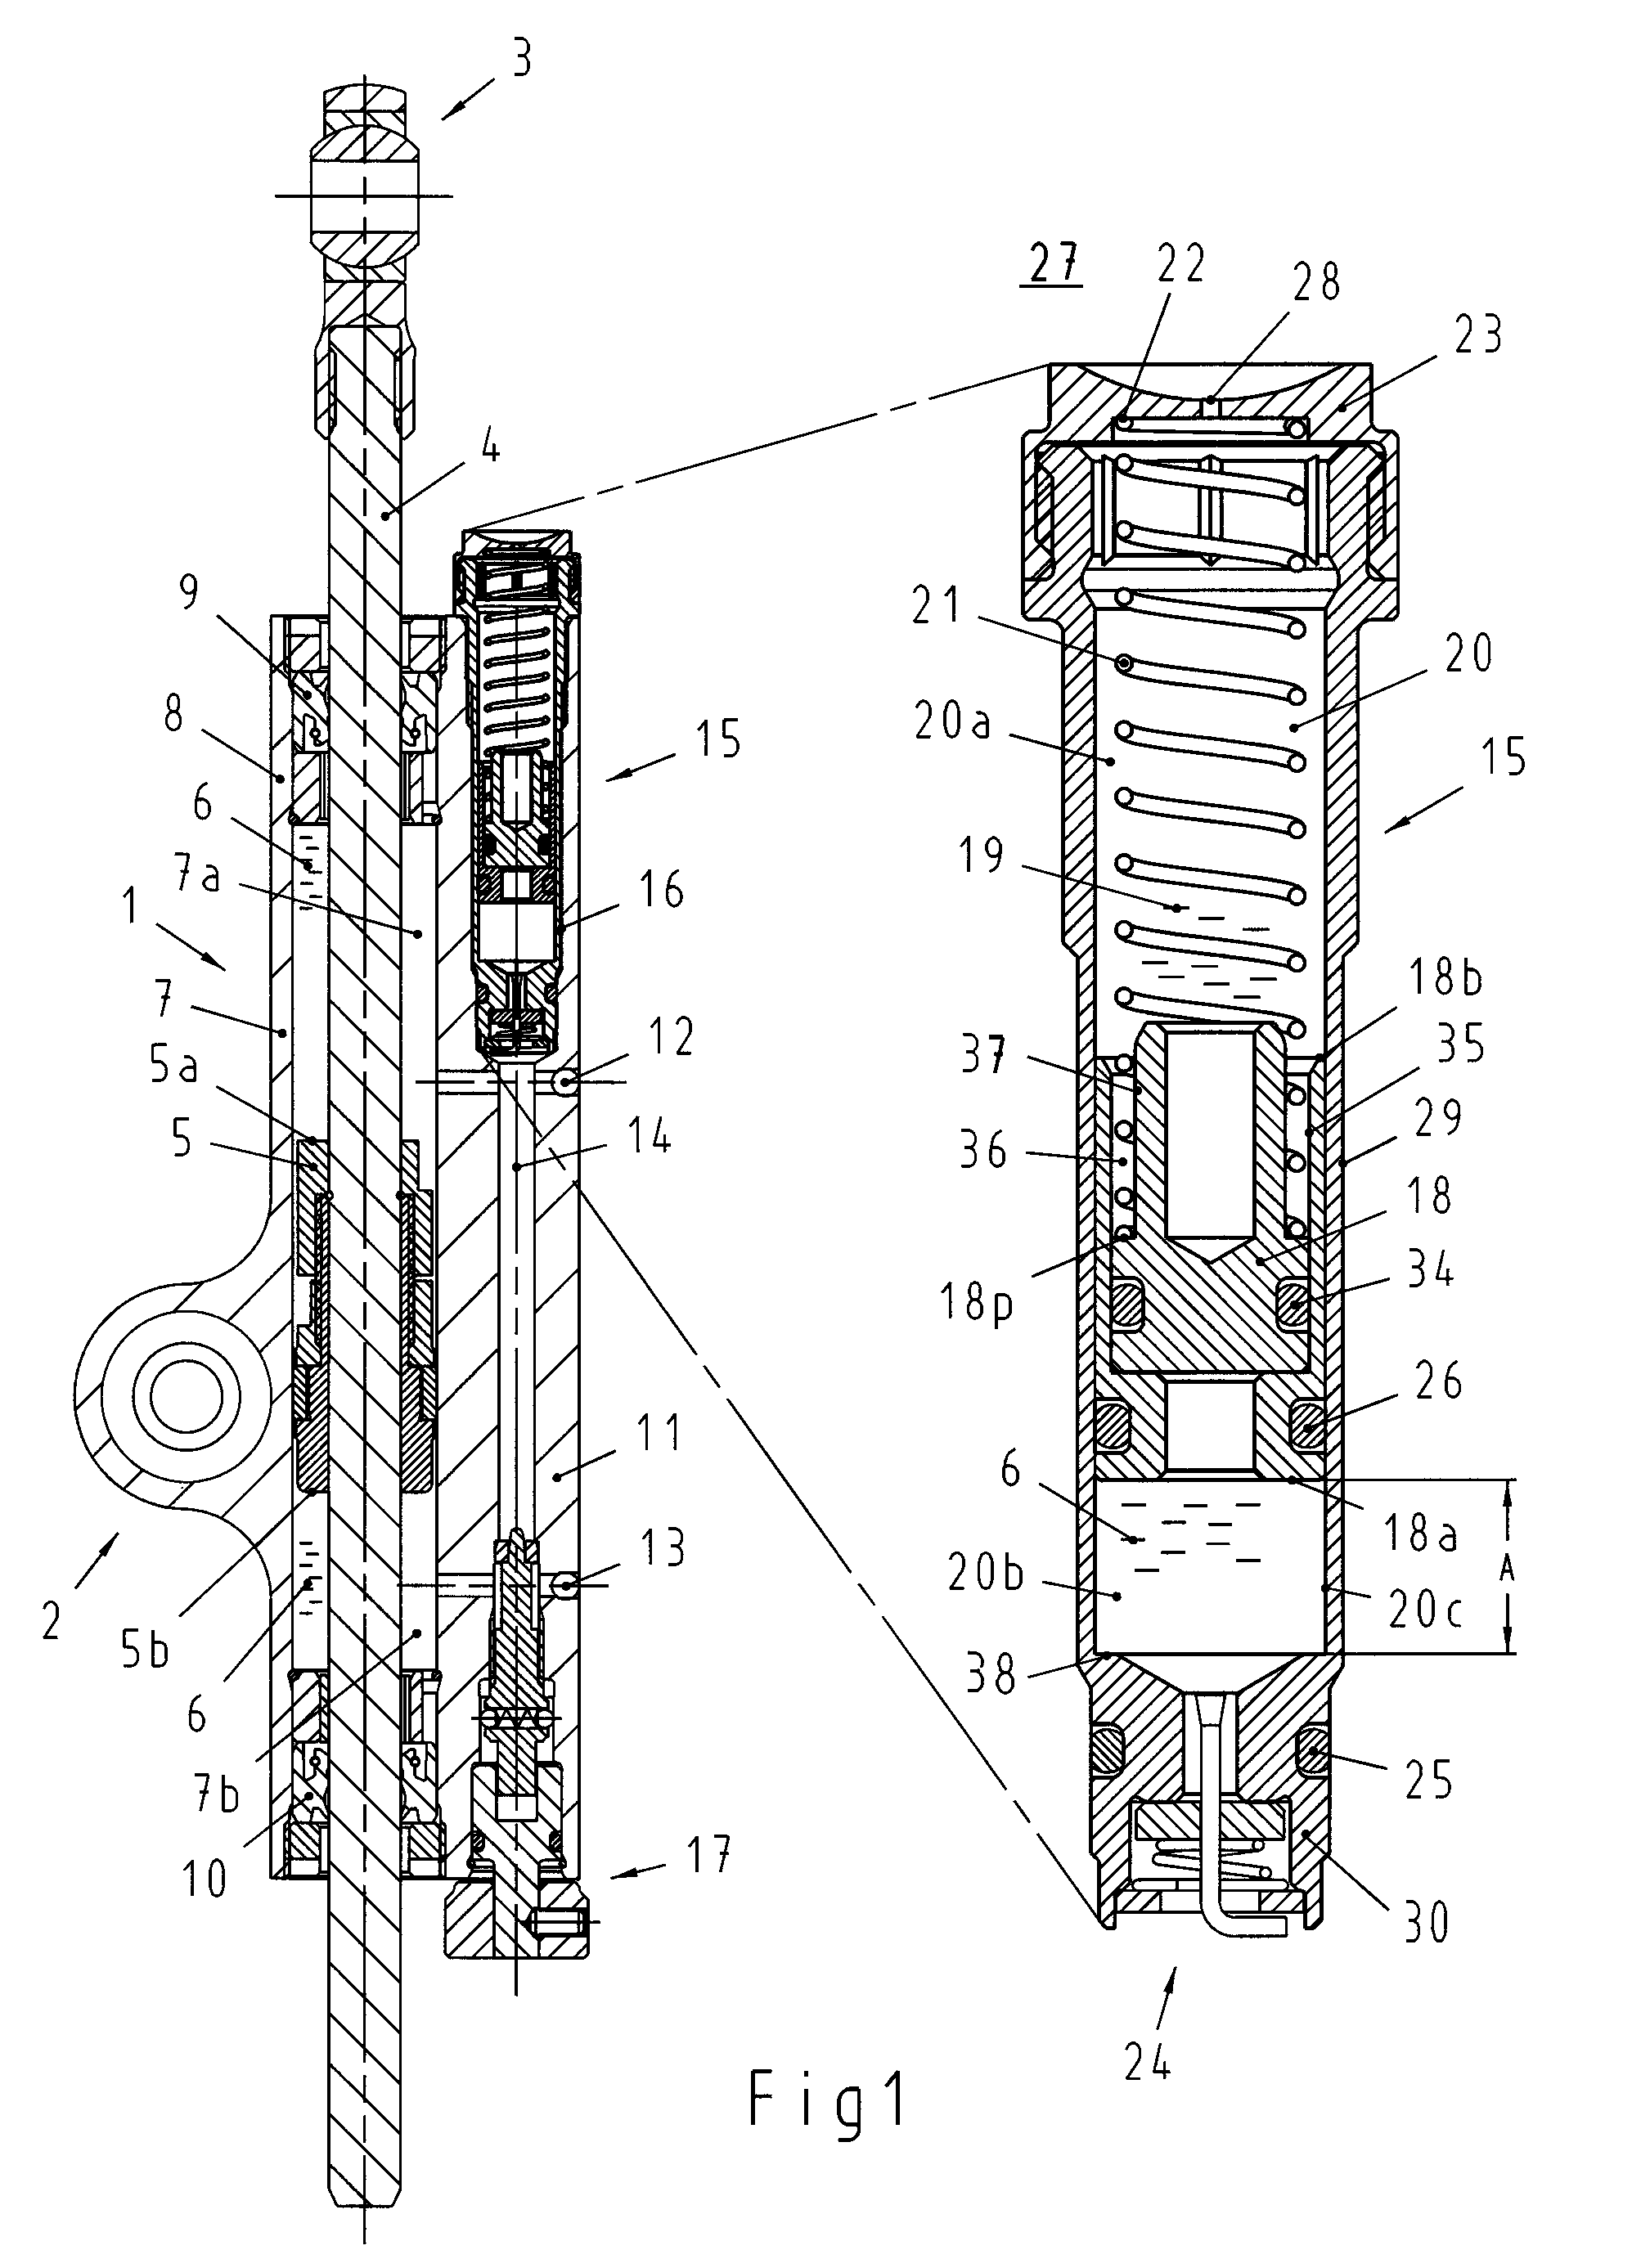 Method for arranging a separating piston in a cavity and a device with such a separating piston